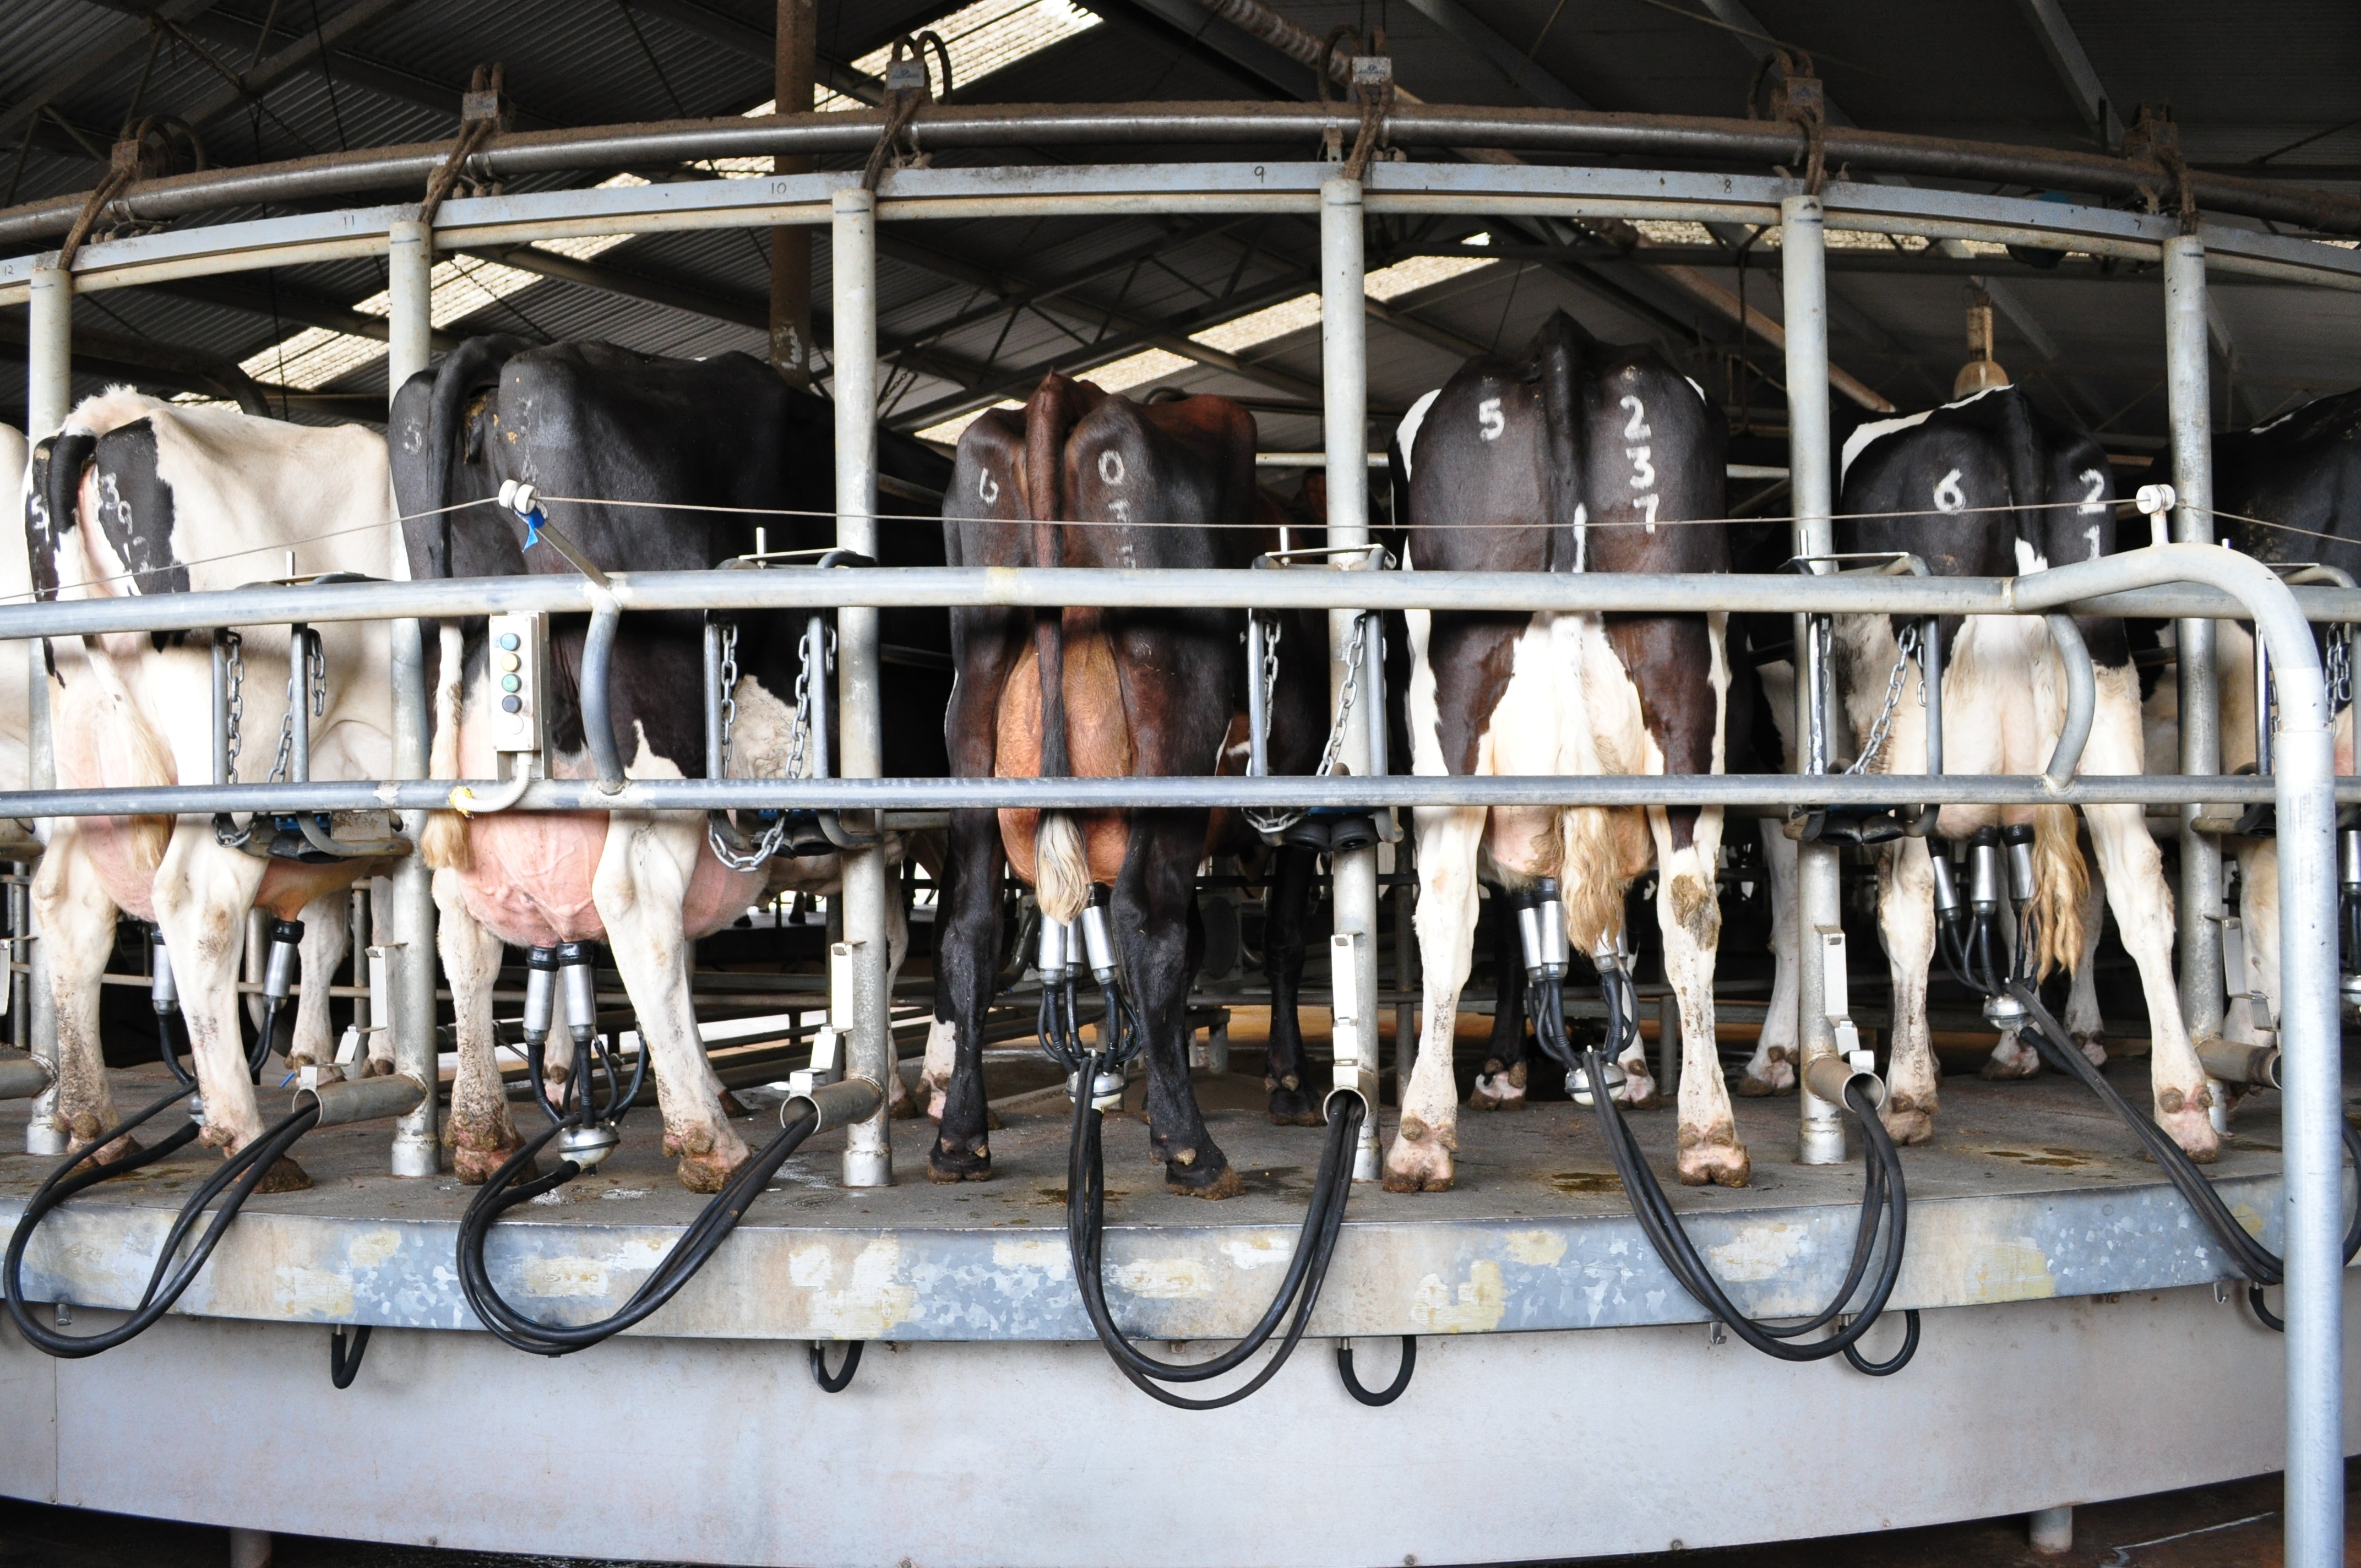 Dairy cows being milked in a rotary dairy